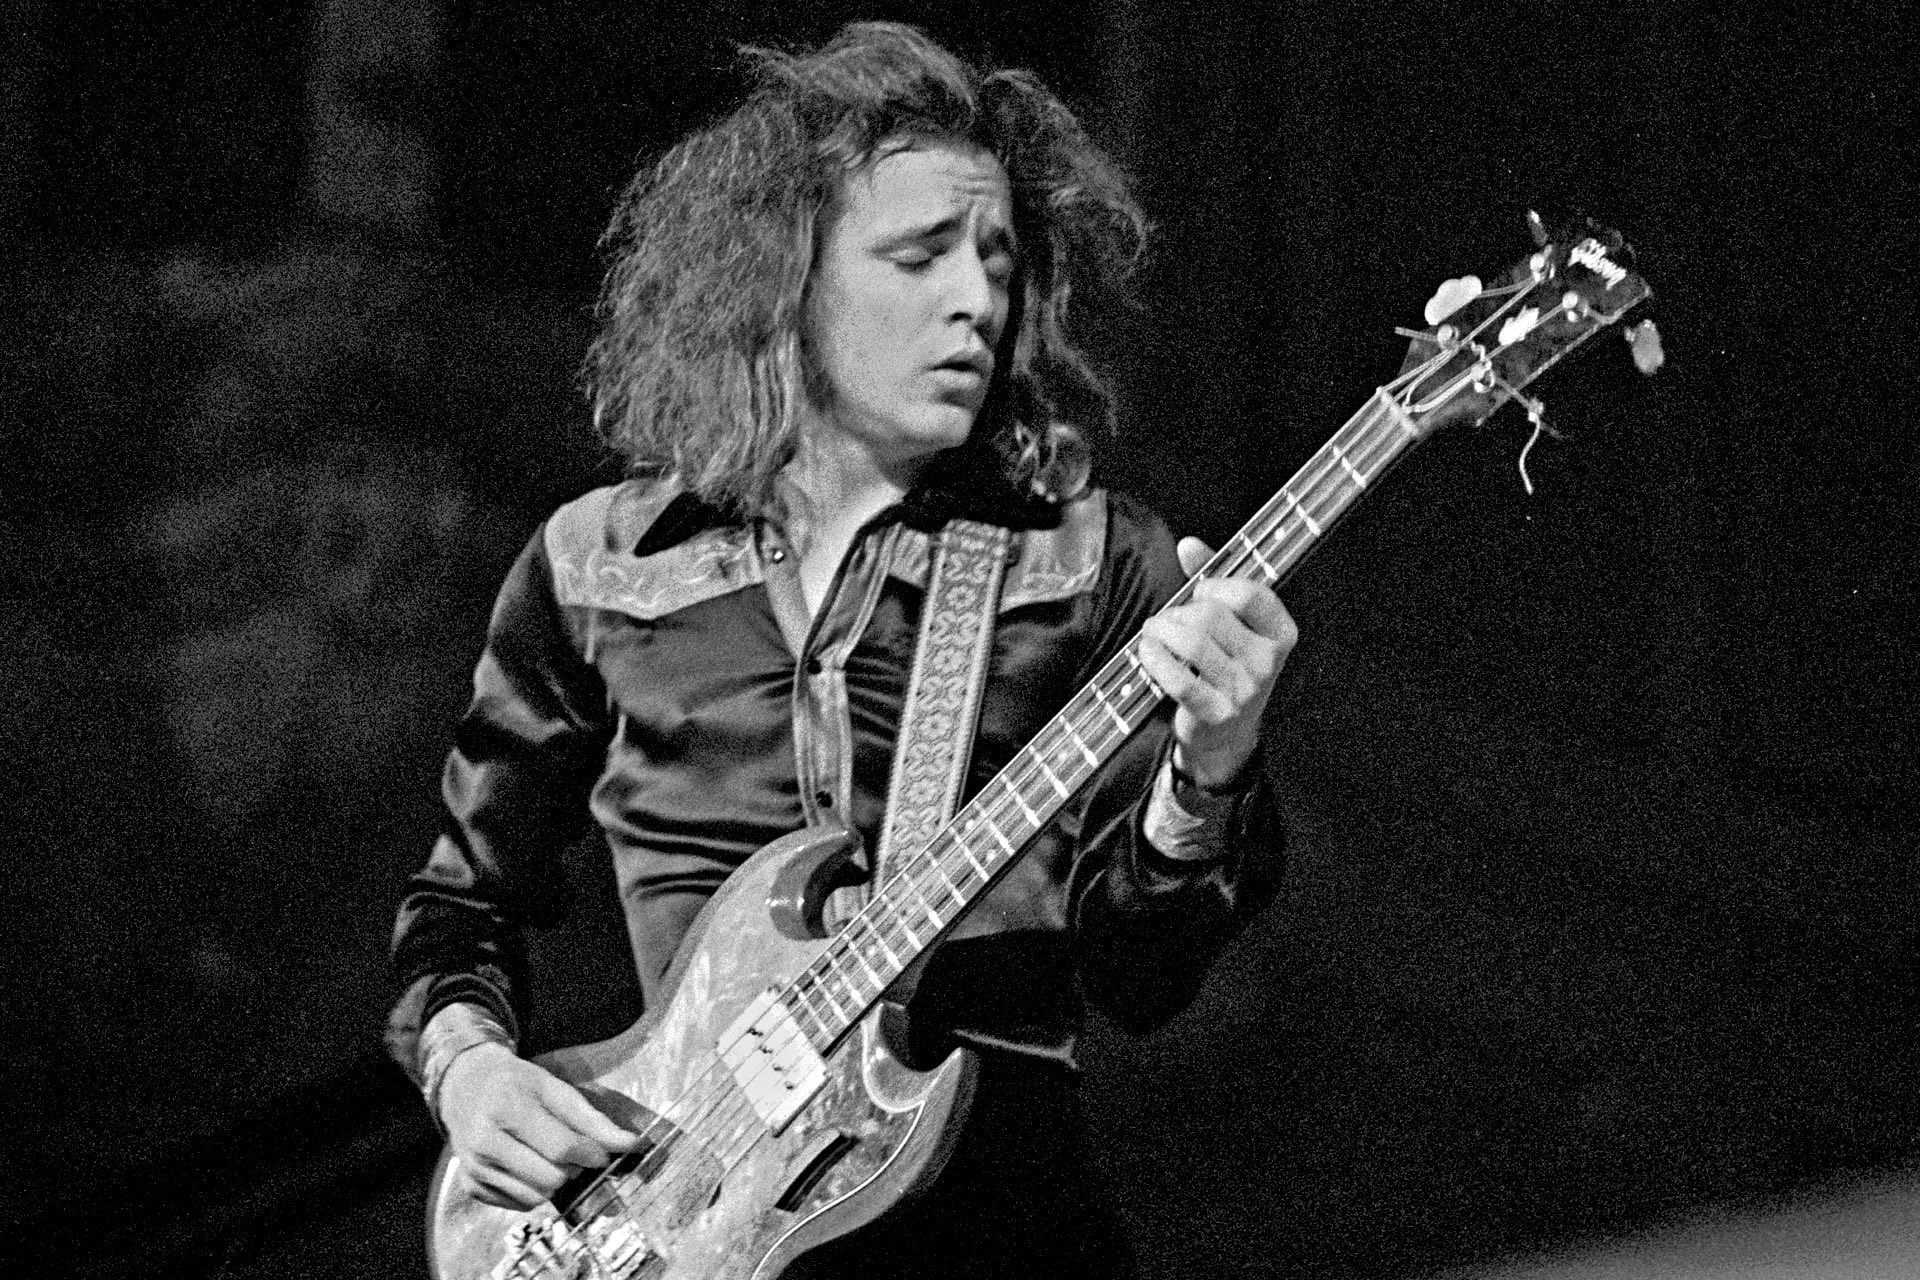 Happy birthday Jack Bruce
You may be gone but your music is forever. 